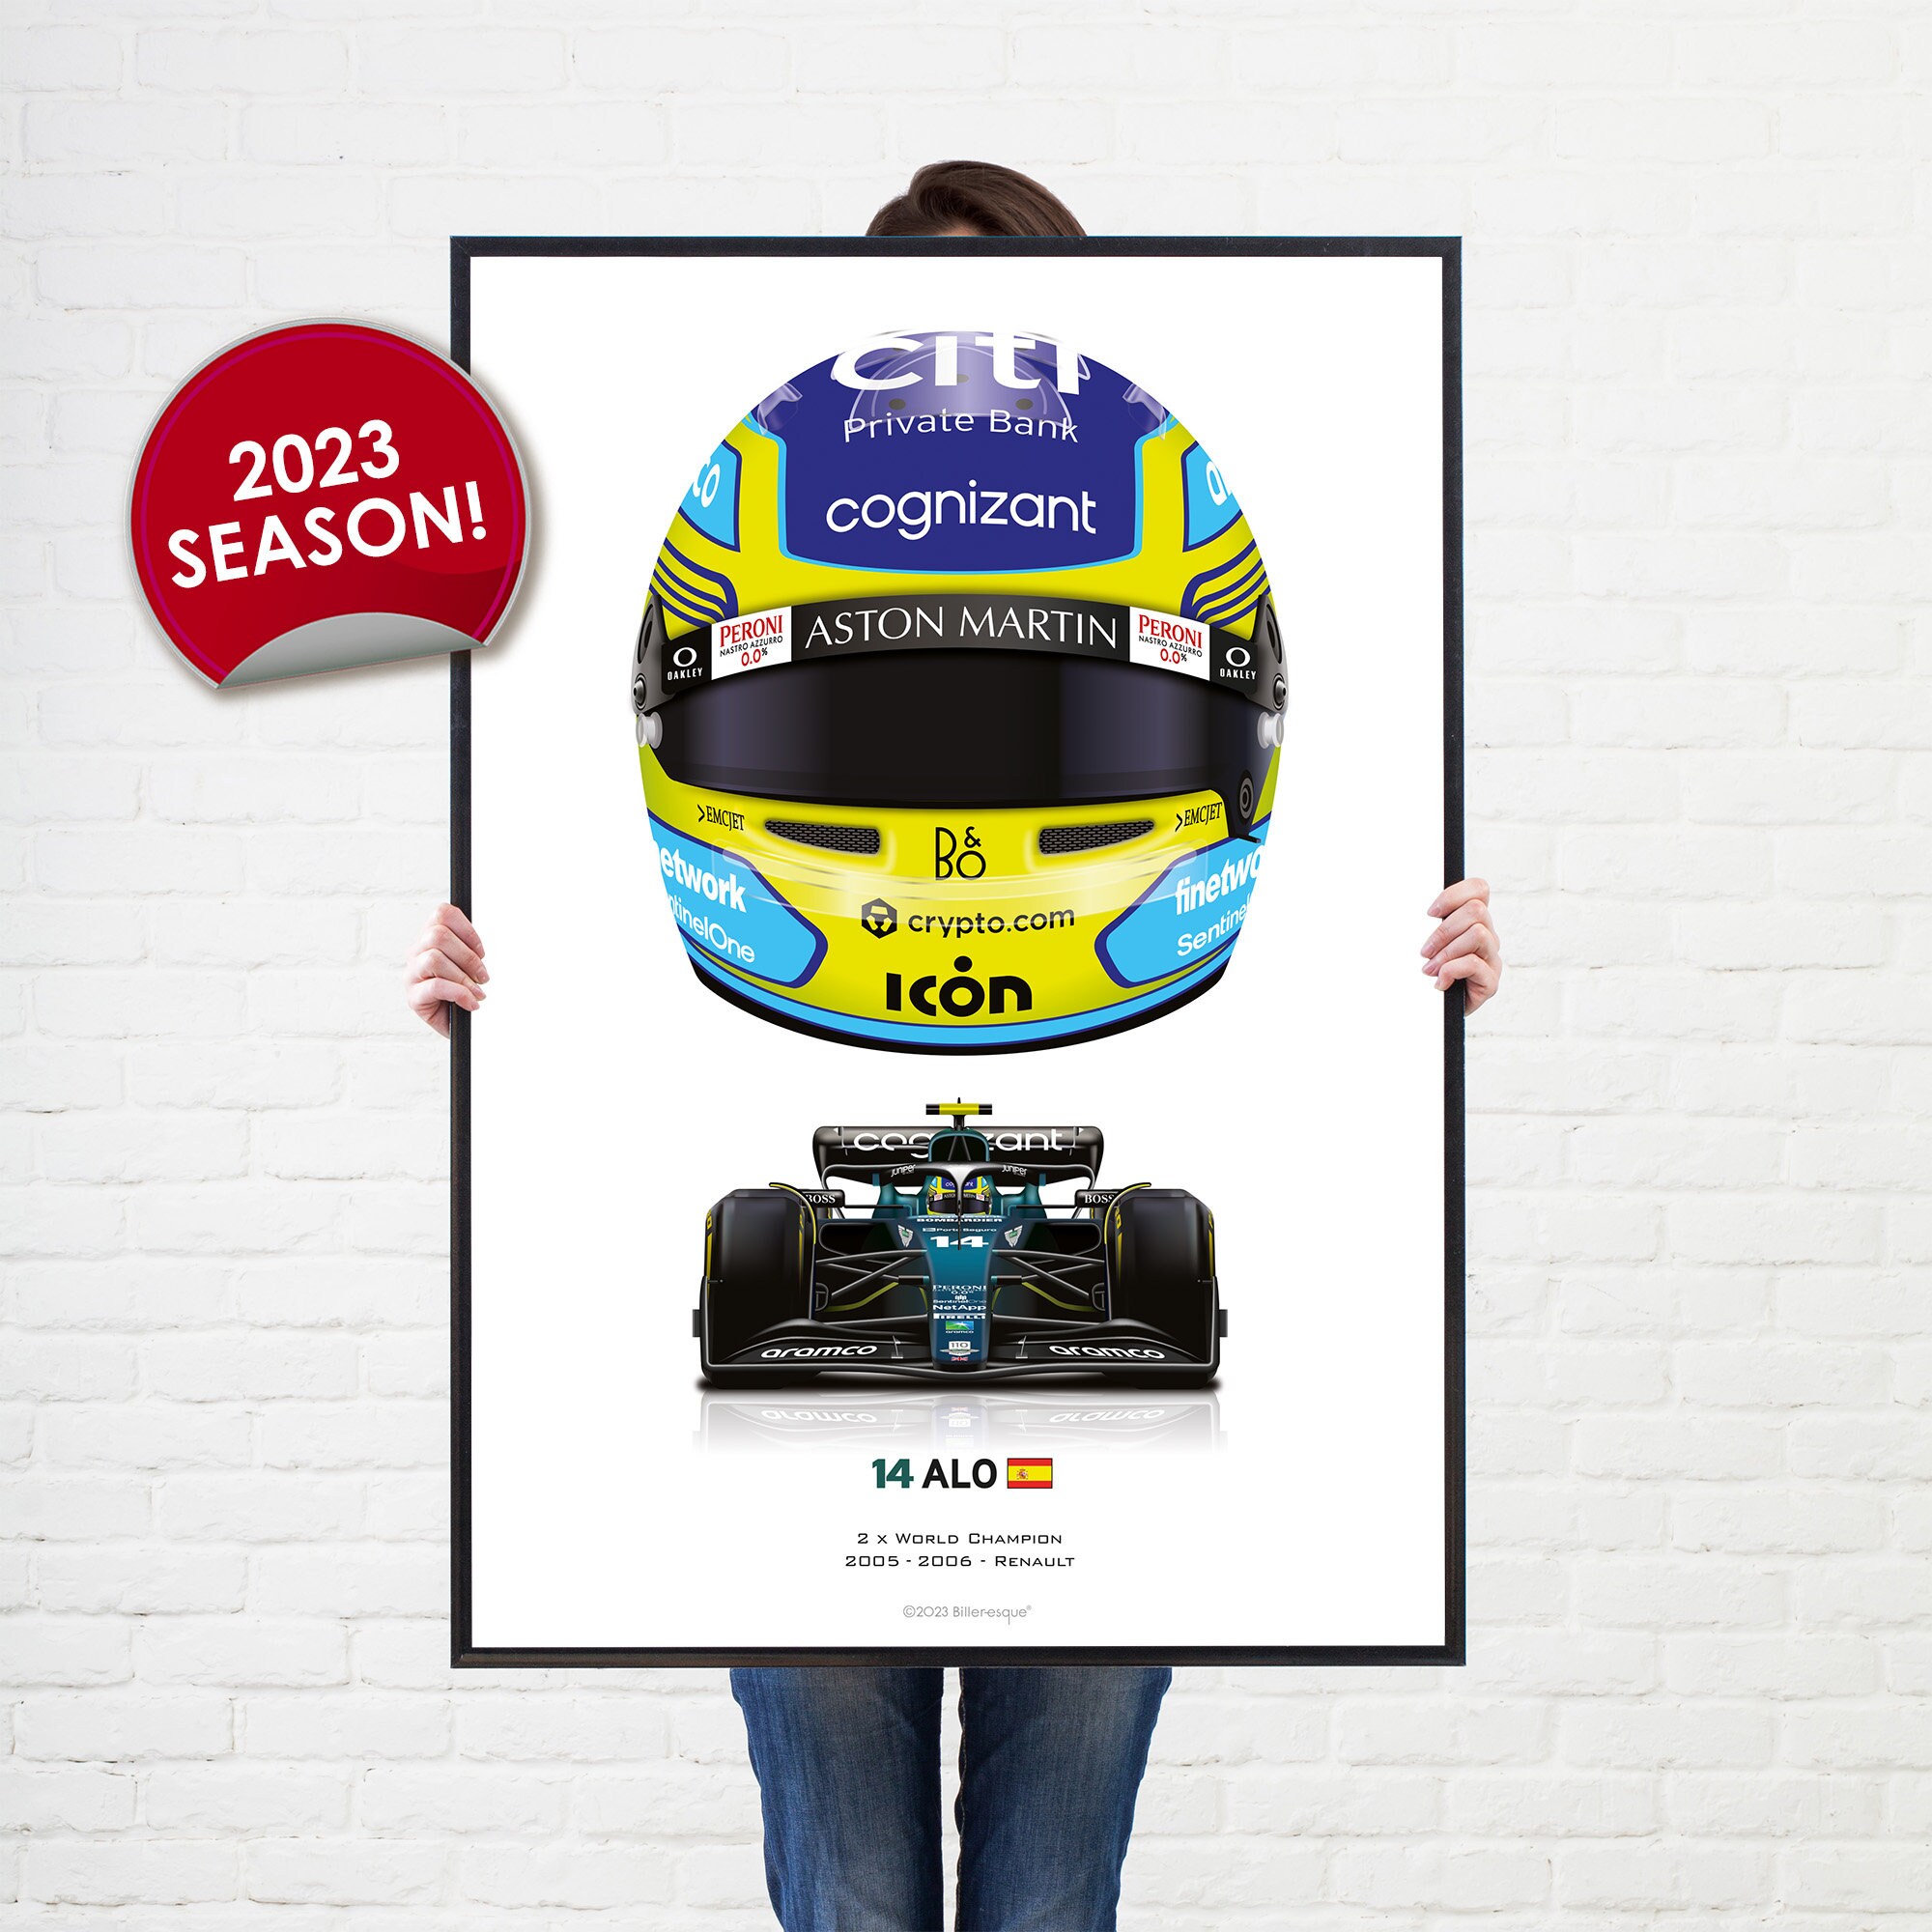 POSTER Fernando ALONSO F1 Helmets Collection 